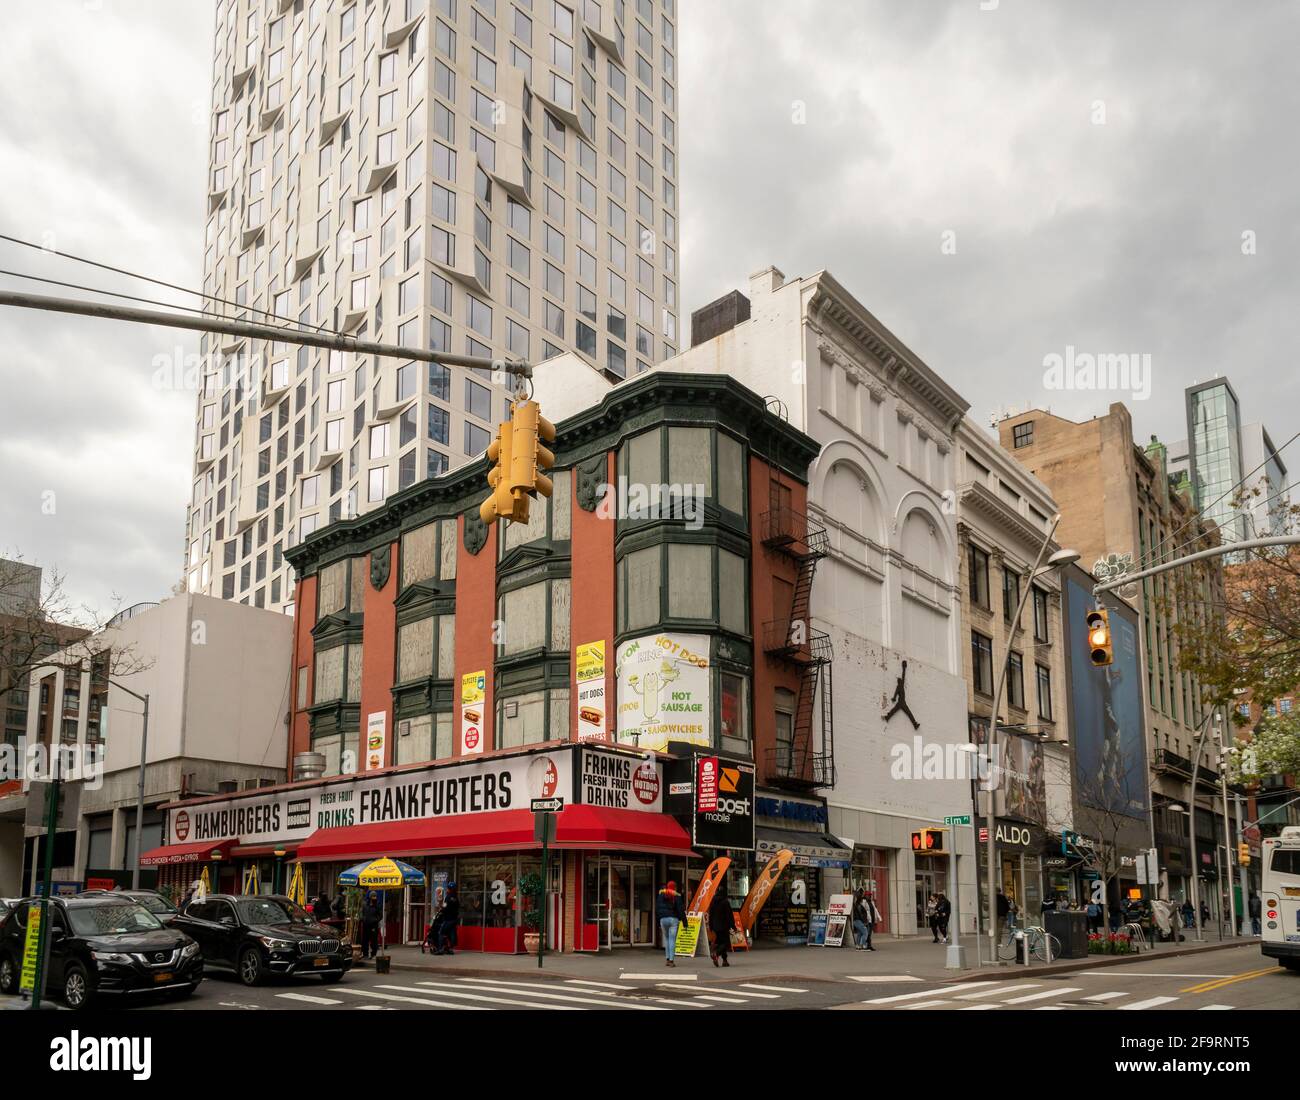 Development in Downtown Brooklyn in New York contrasts with older low rise buildings, on Sunday, April 18, 2021. Because of increased development in the area, notably hi-rise luxury apartment buildings, chain stores and high-end retailers are moving in. (Photo by Richard B. Levine) Stock Photo